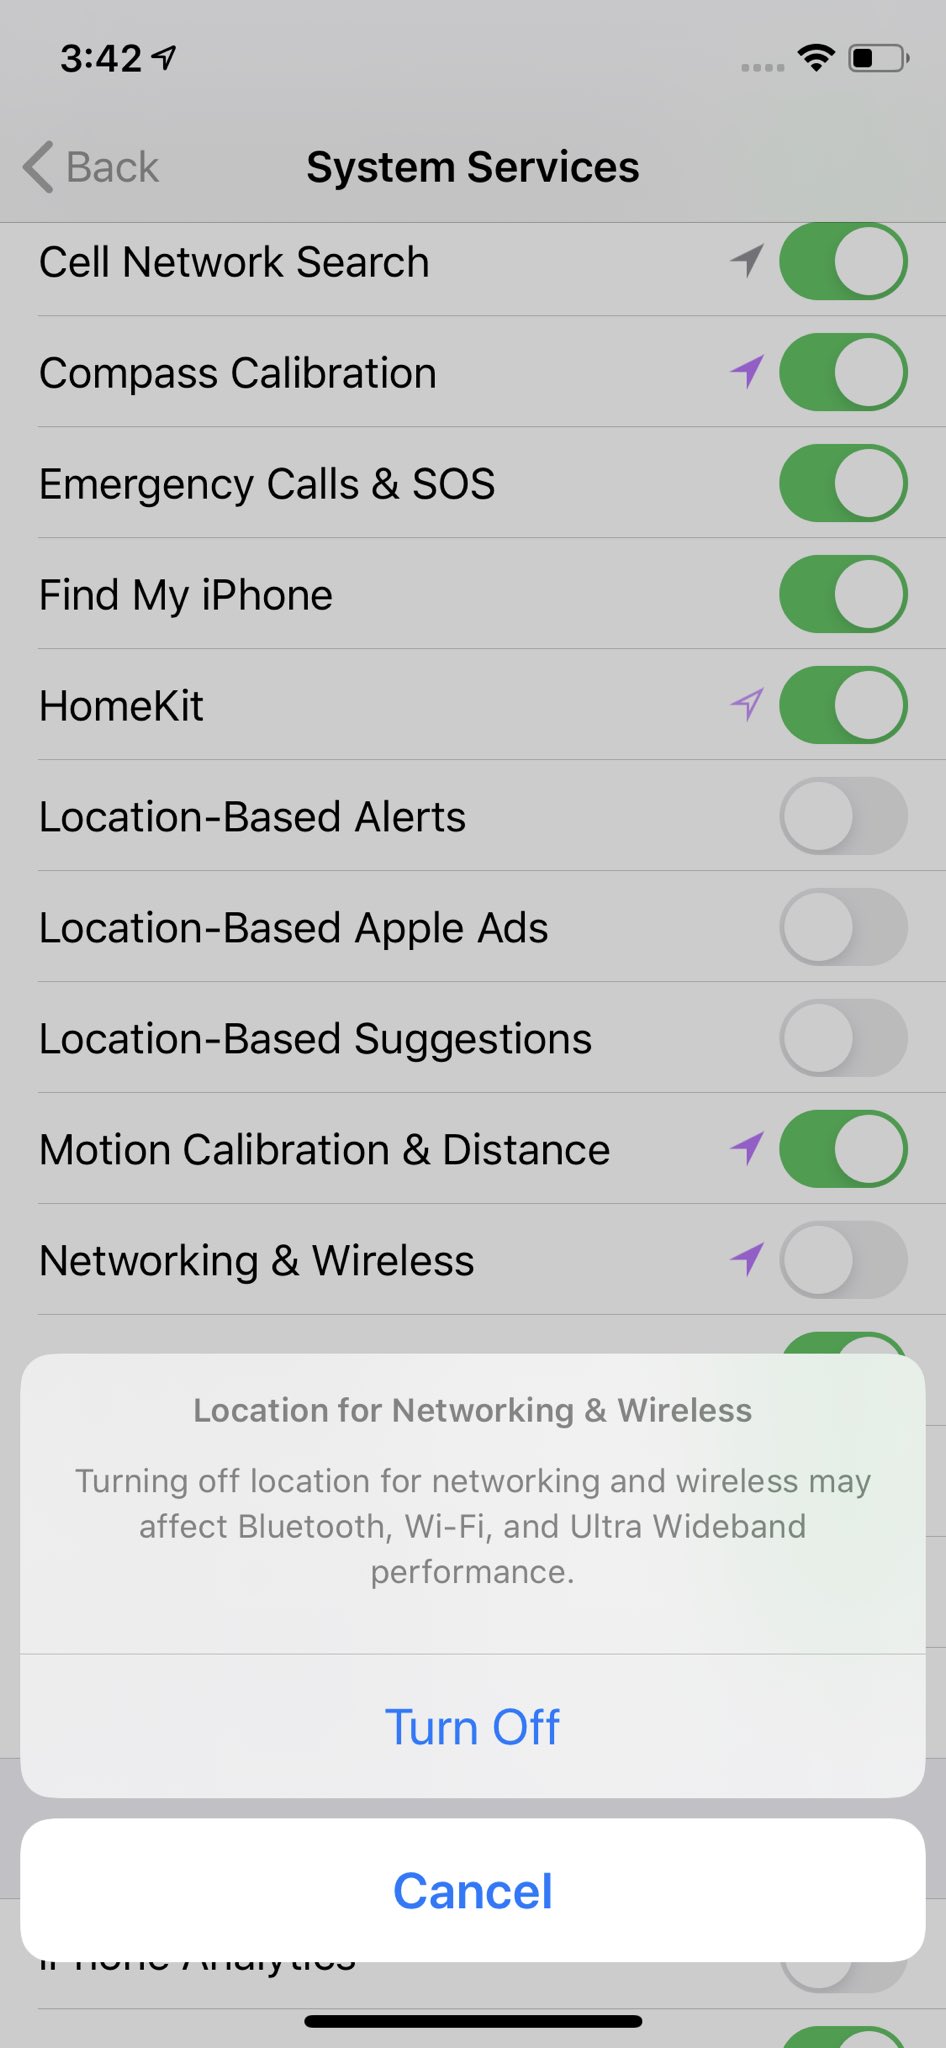 iOS 13.3.1 Beta 2 Introduces Toggle to Disable Location for Networking &amp; Wireless